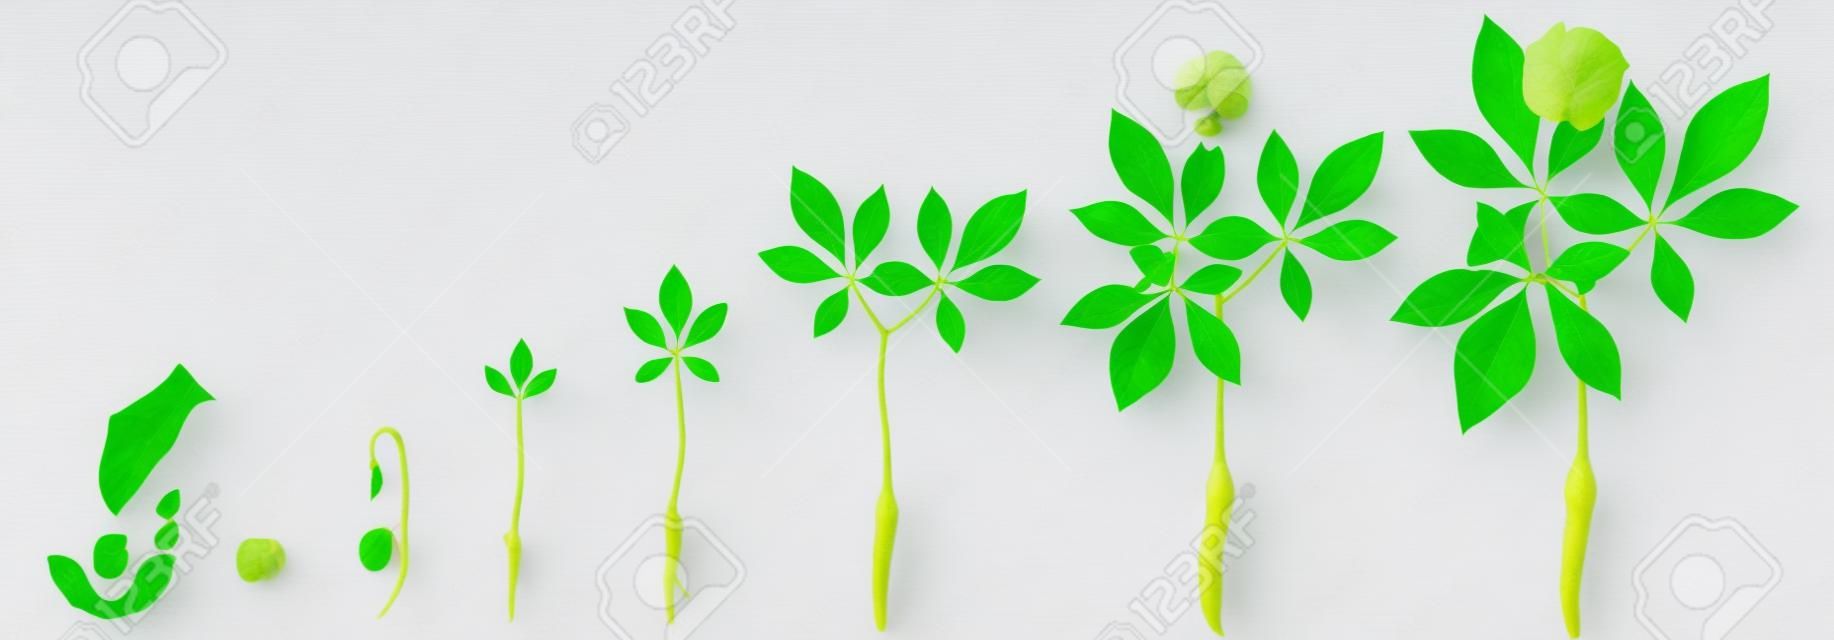 Cycle of growth of a ginseng (Panax ginseng) plant on a white background.